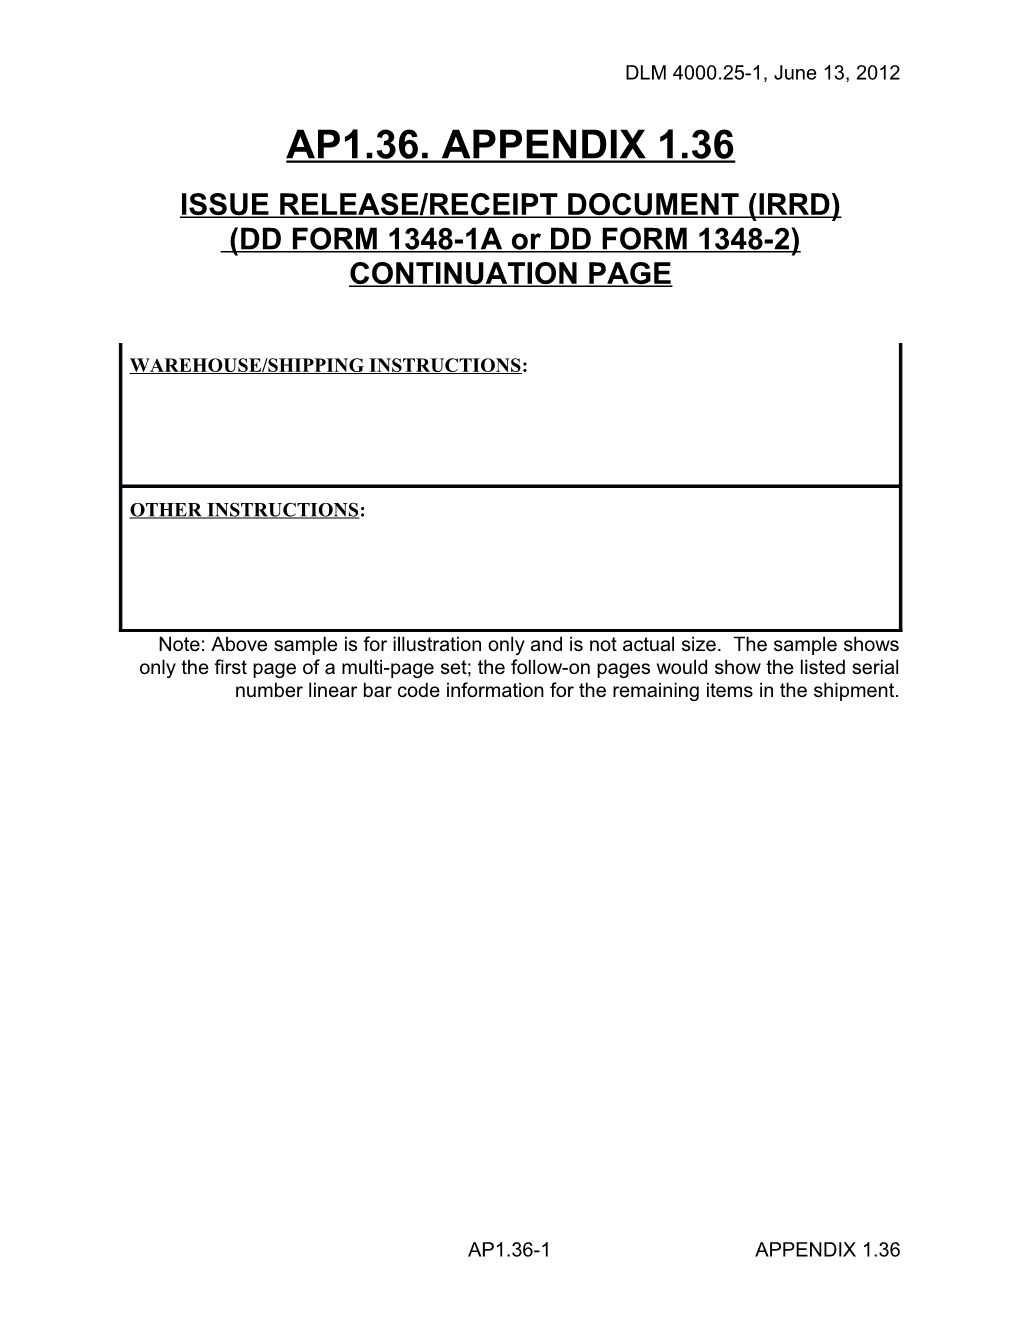 Appendix 1.36 - IRRD (DD Form 1348-1A Or DD Form 1348-2) Continuation Page